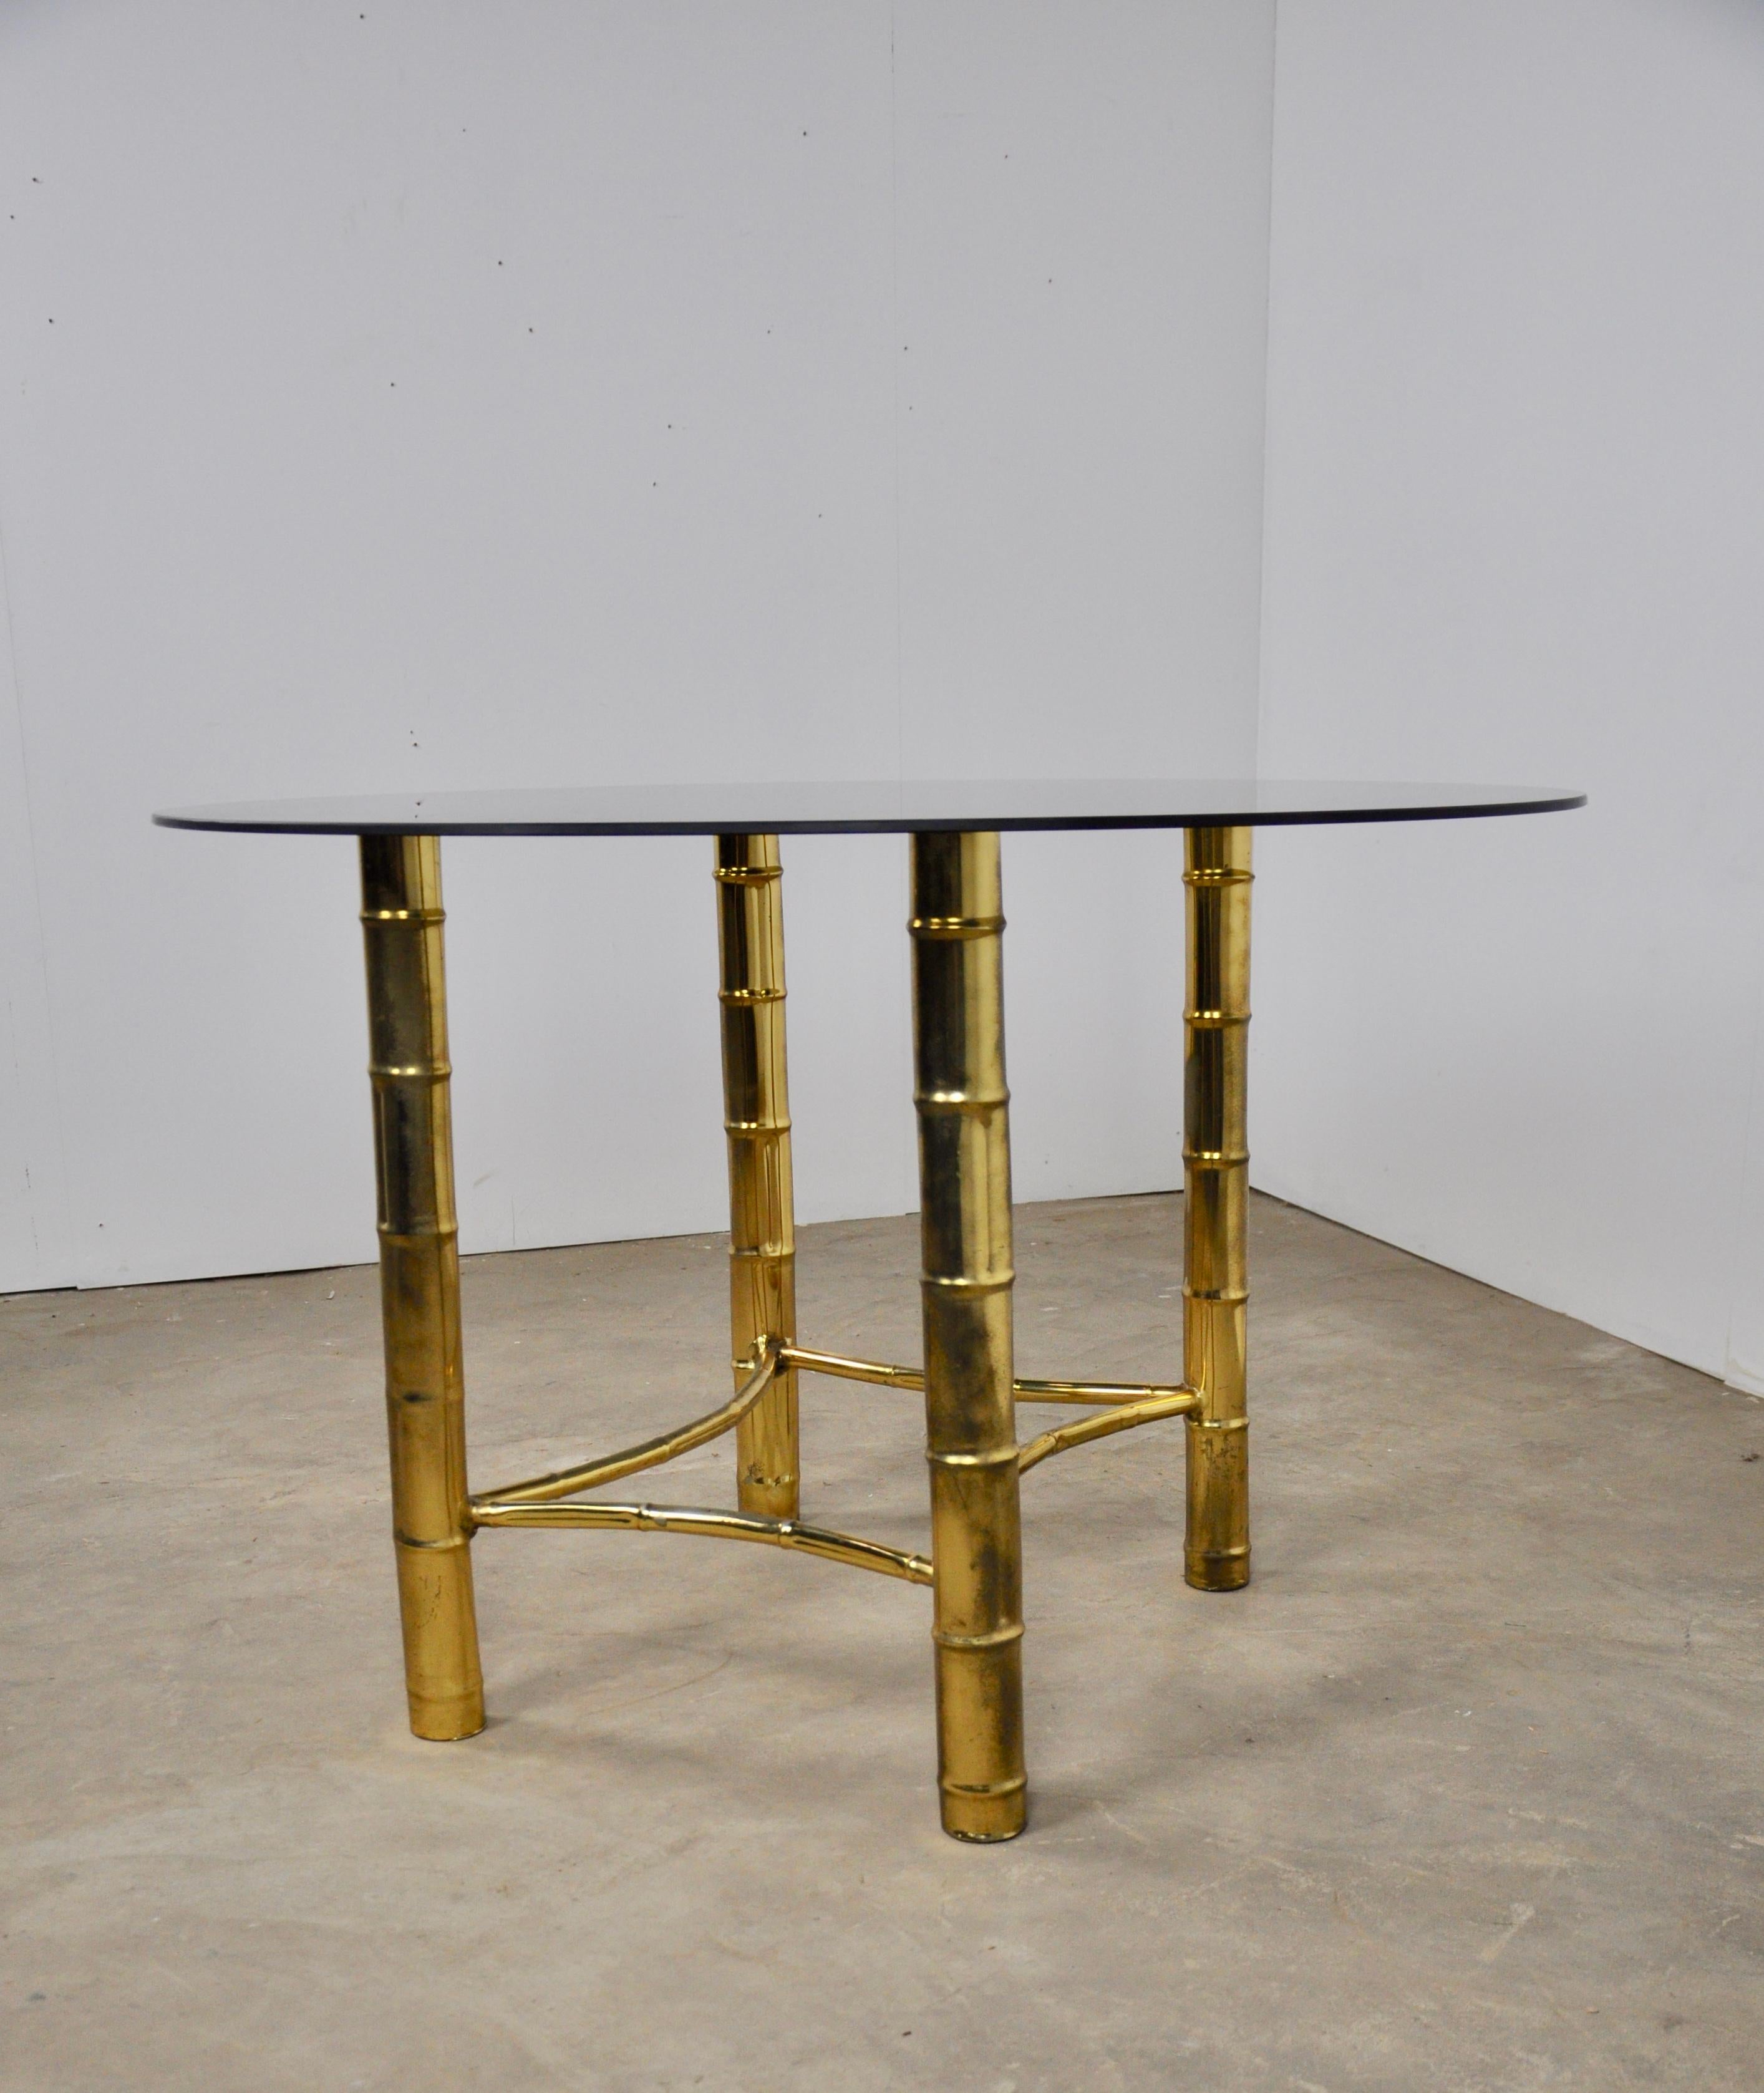 Brass table with 4 legs in bamboo imitation. The shelf is made of smoked glass.